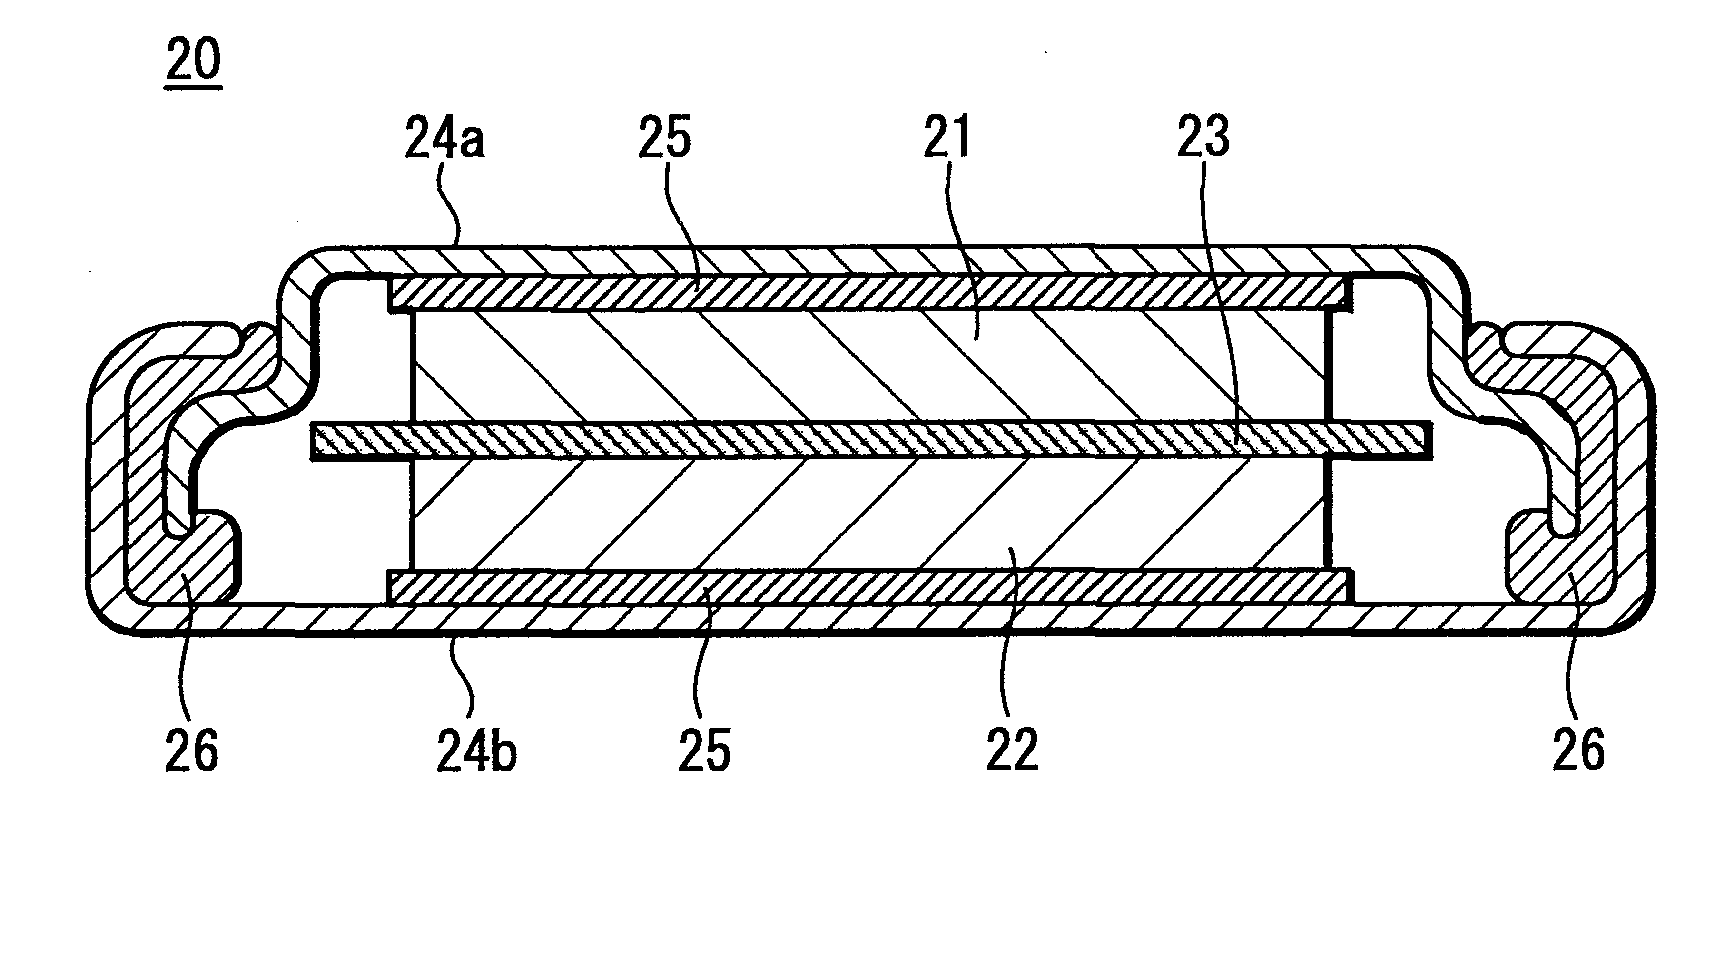 Carbon catalyst, slurry containing the carbon catalyst, process for producing carbon catalyst, and fuel cell, storage device, and environmental catalyst each employing carbon catalyst